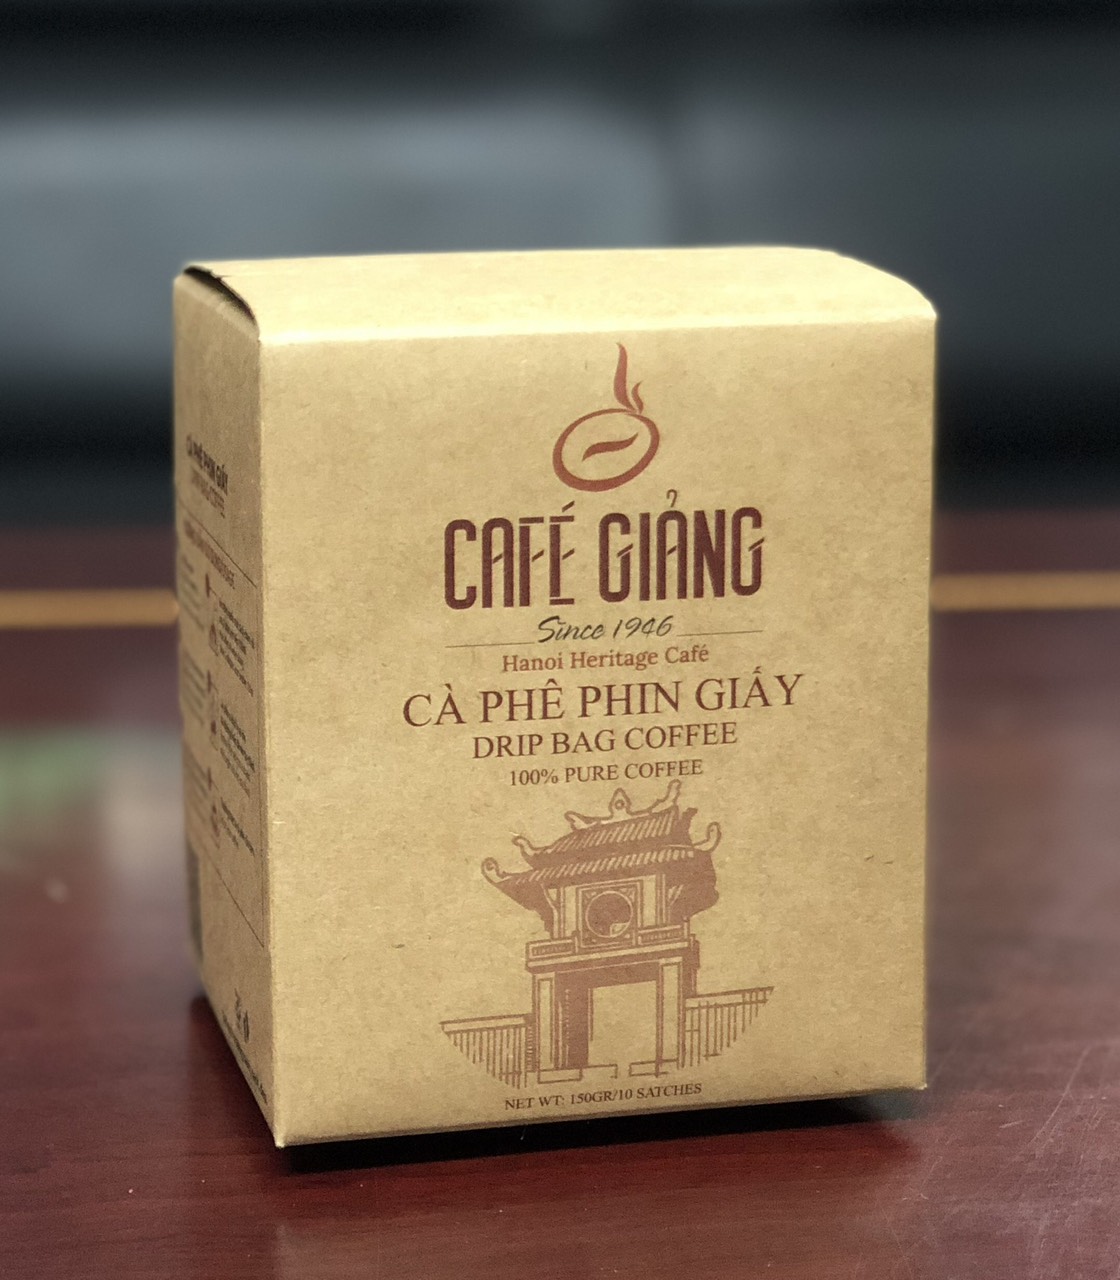 Hộp đựng phin giấy Cafe Giảng